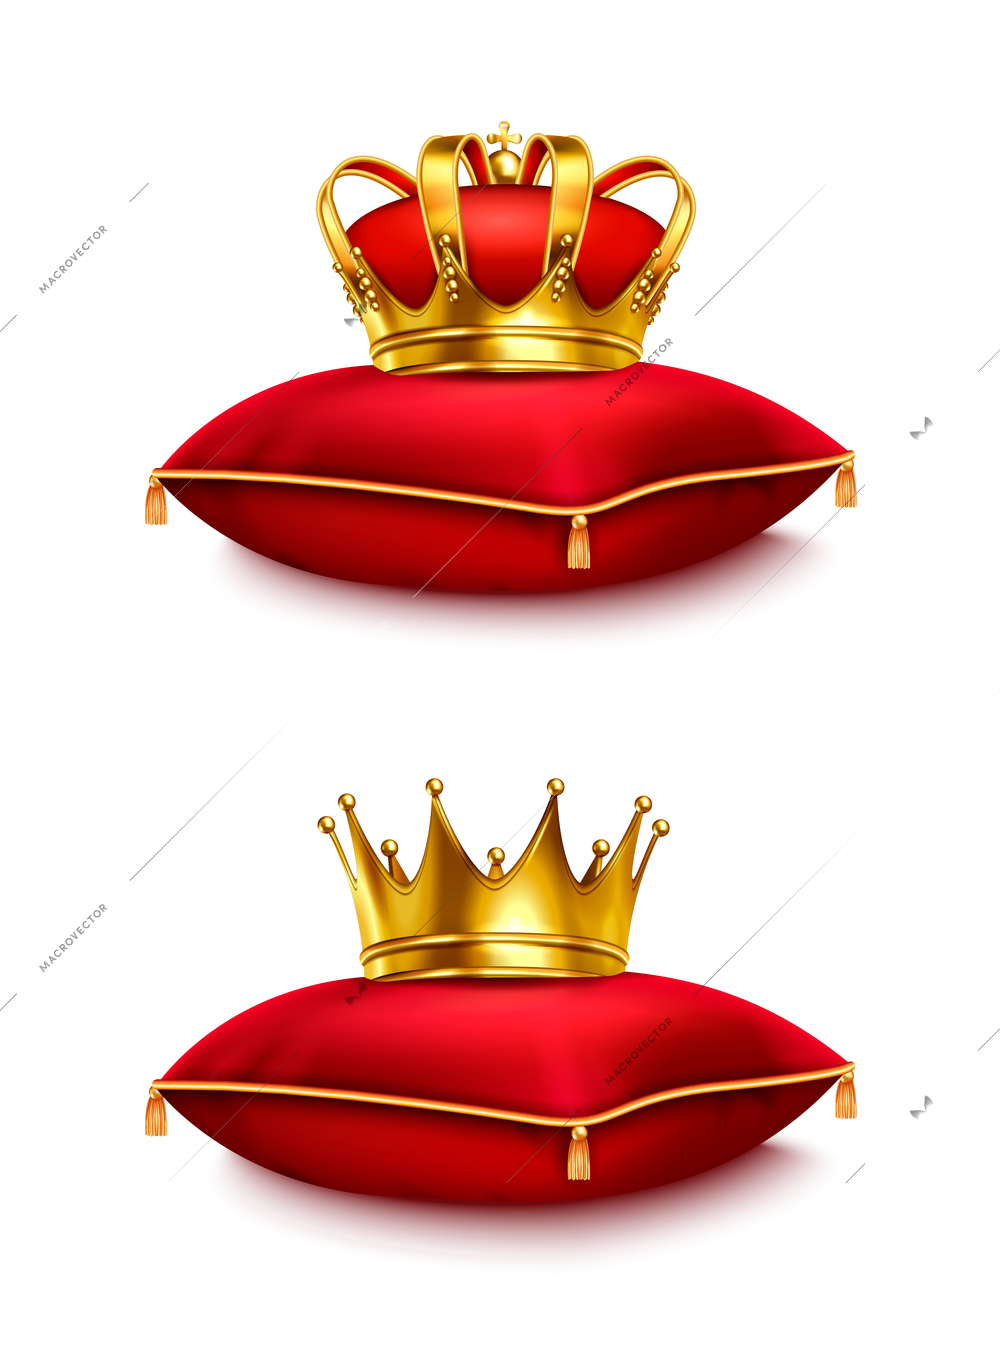 Two golden crowns on red ceremonial pillows isolated on white background realistic vector illustration